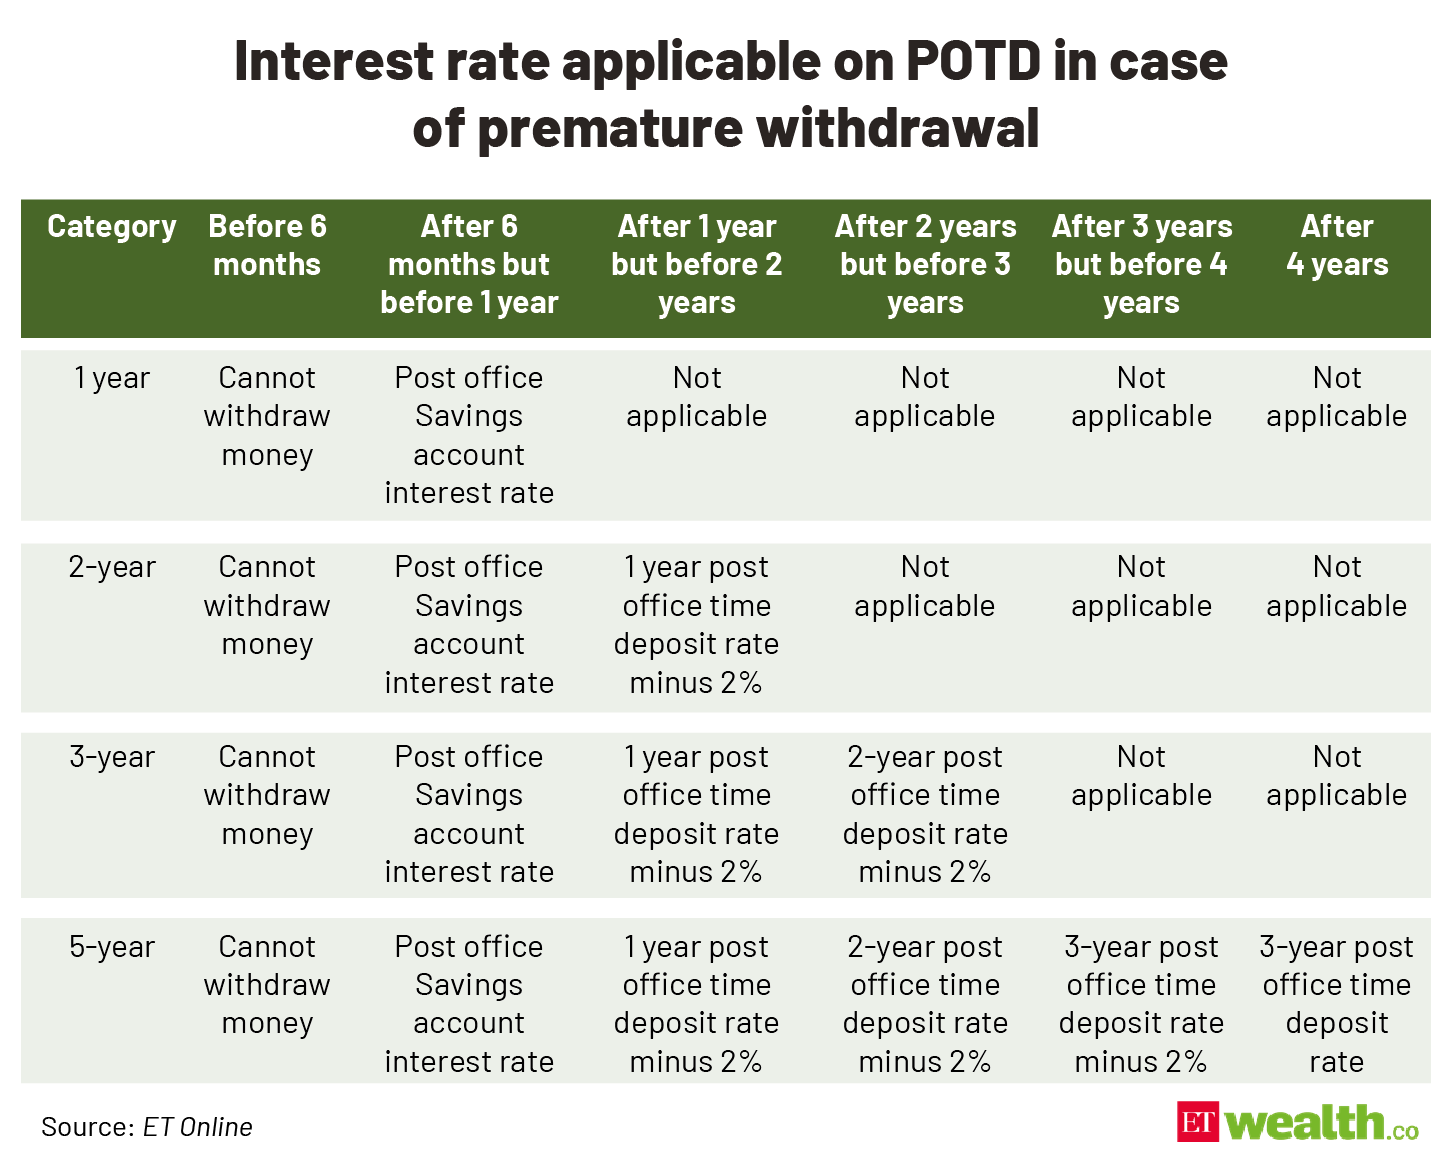 post office time deposit: Post office time deposit premature withdrawal can  cost you 48% of the interest - The Economic Times